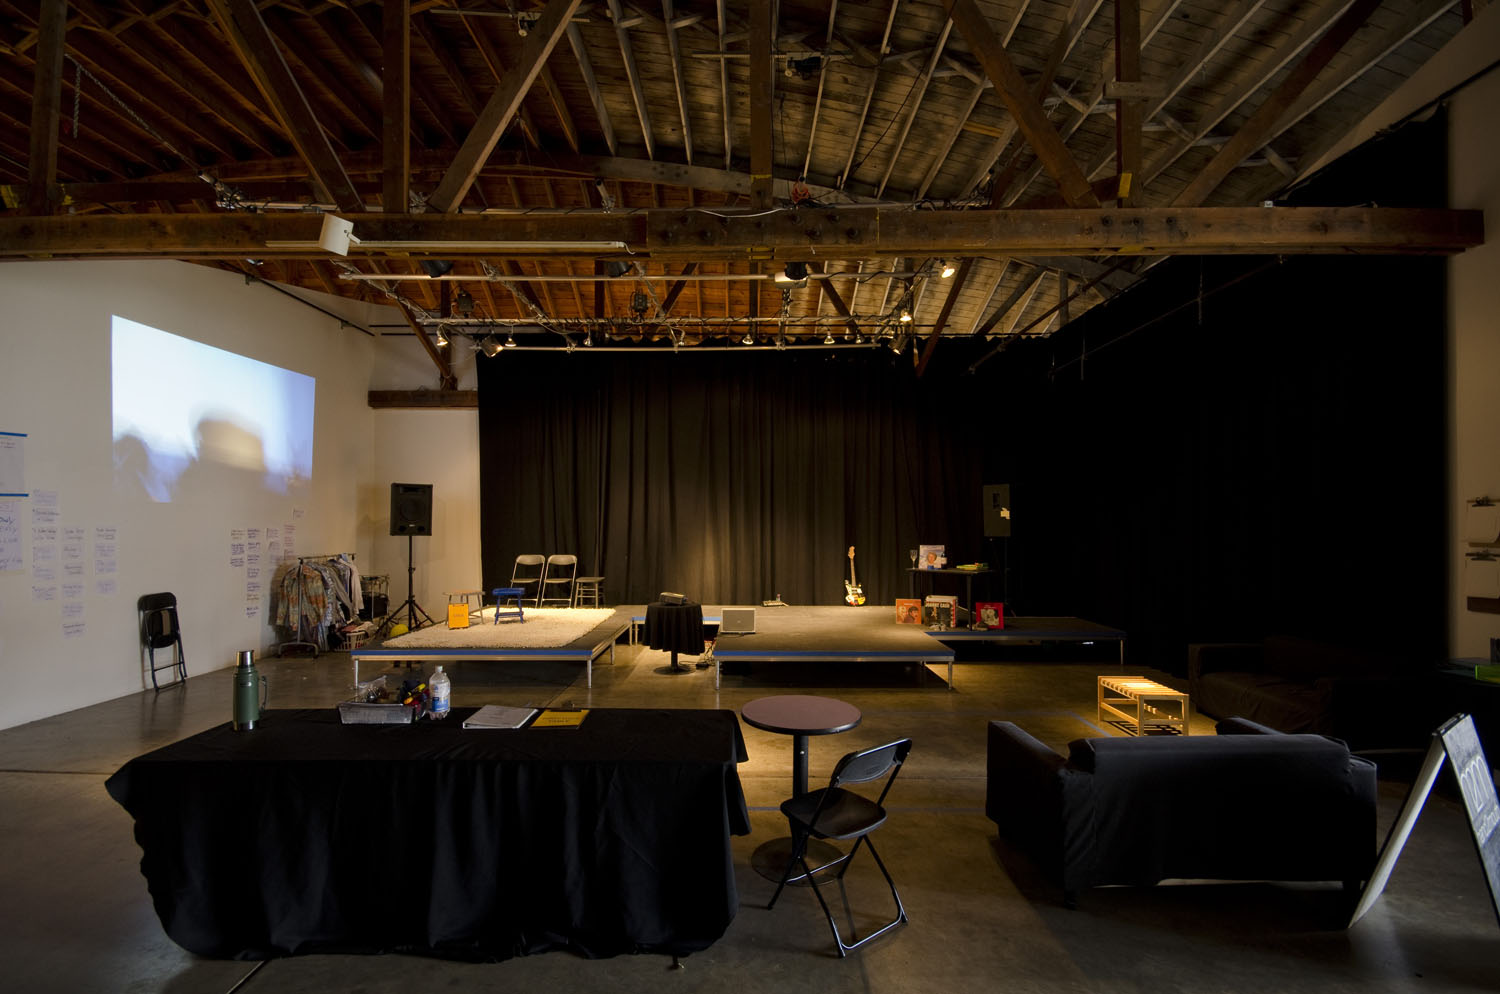  Hand2Mouth Theatre  at Disjecta  photo by Mark Stein 